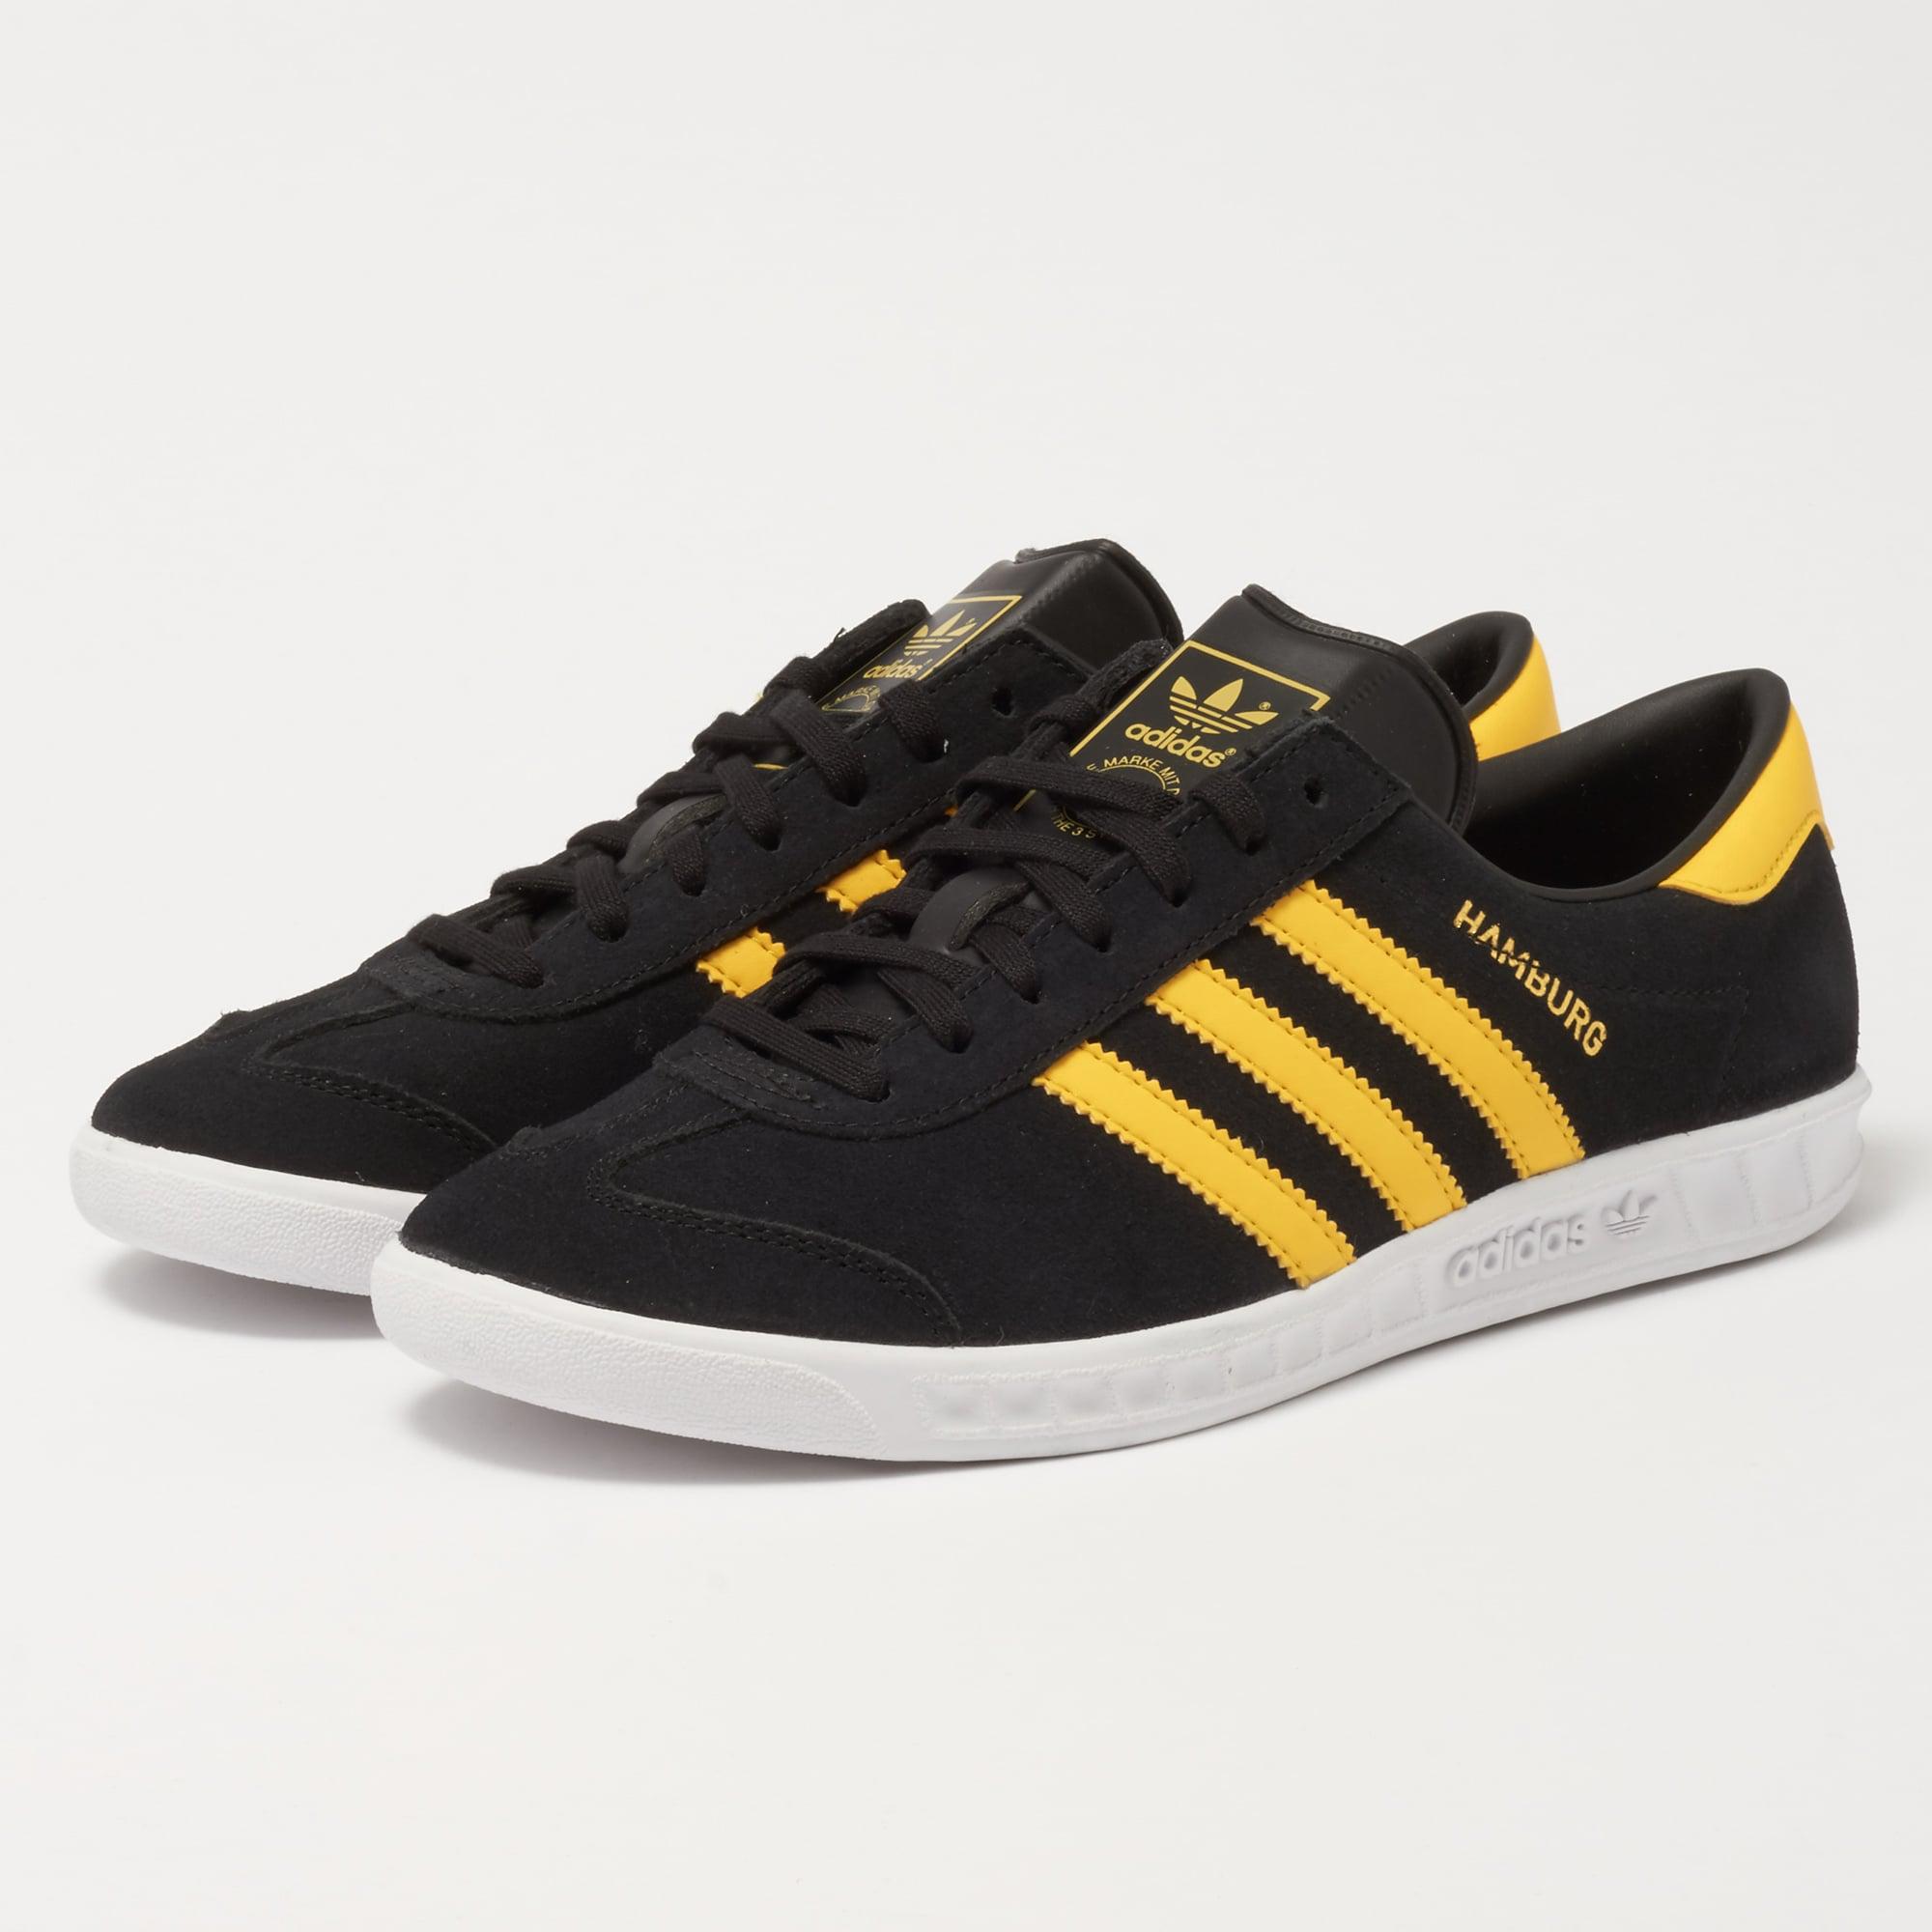 Adidas Black Yellow Shoes Top Sellers, SAVE 59% - aveclumiere.com